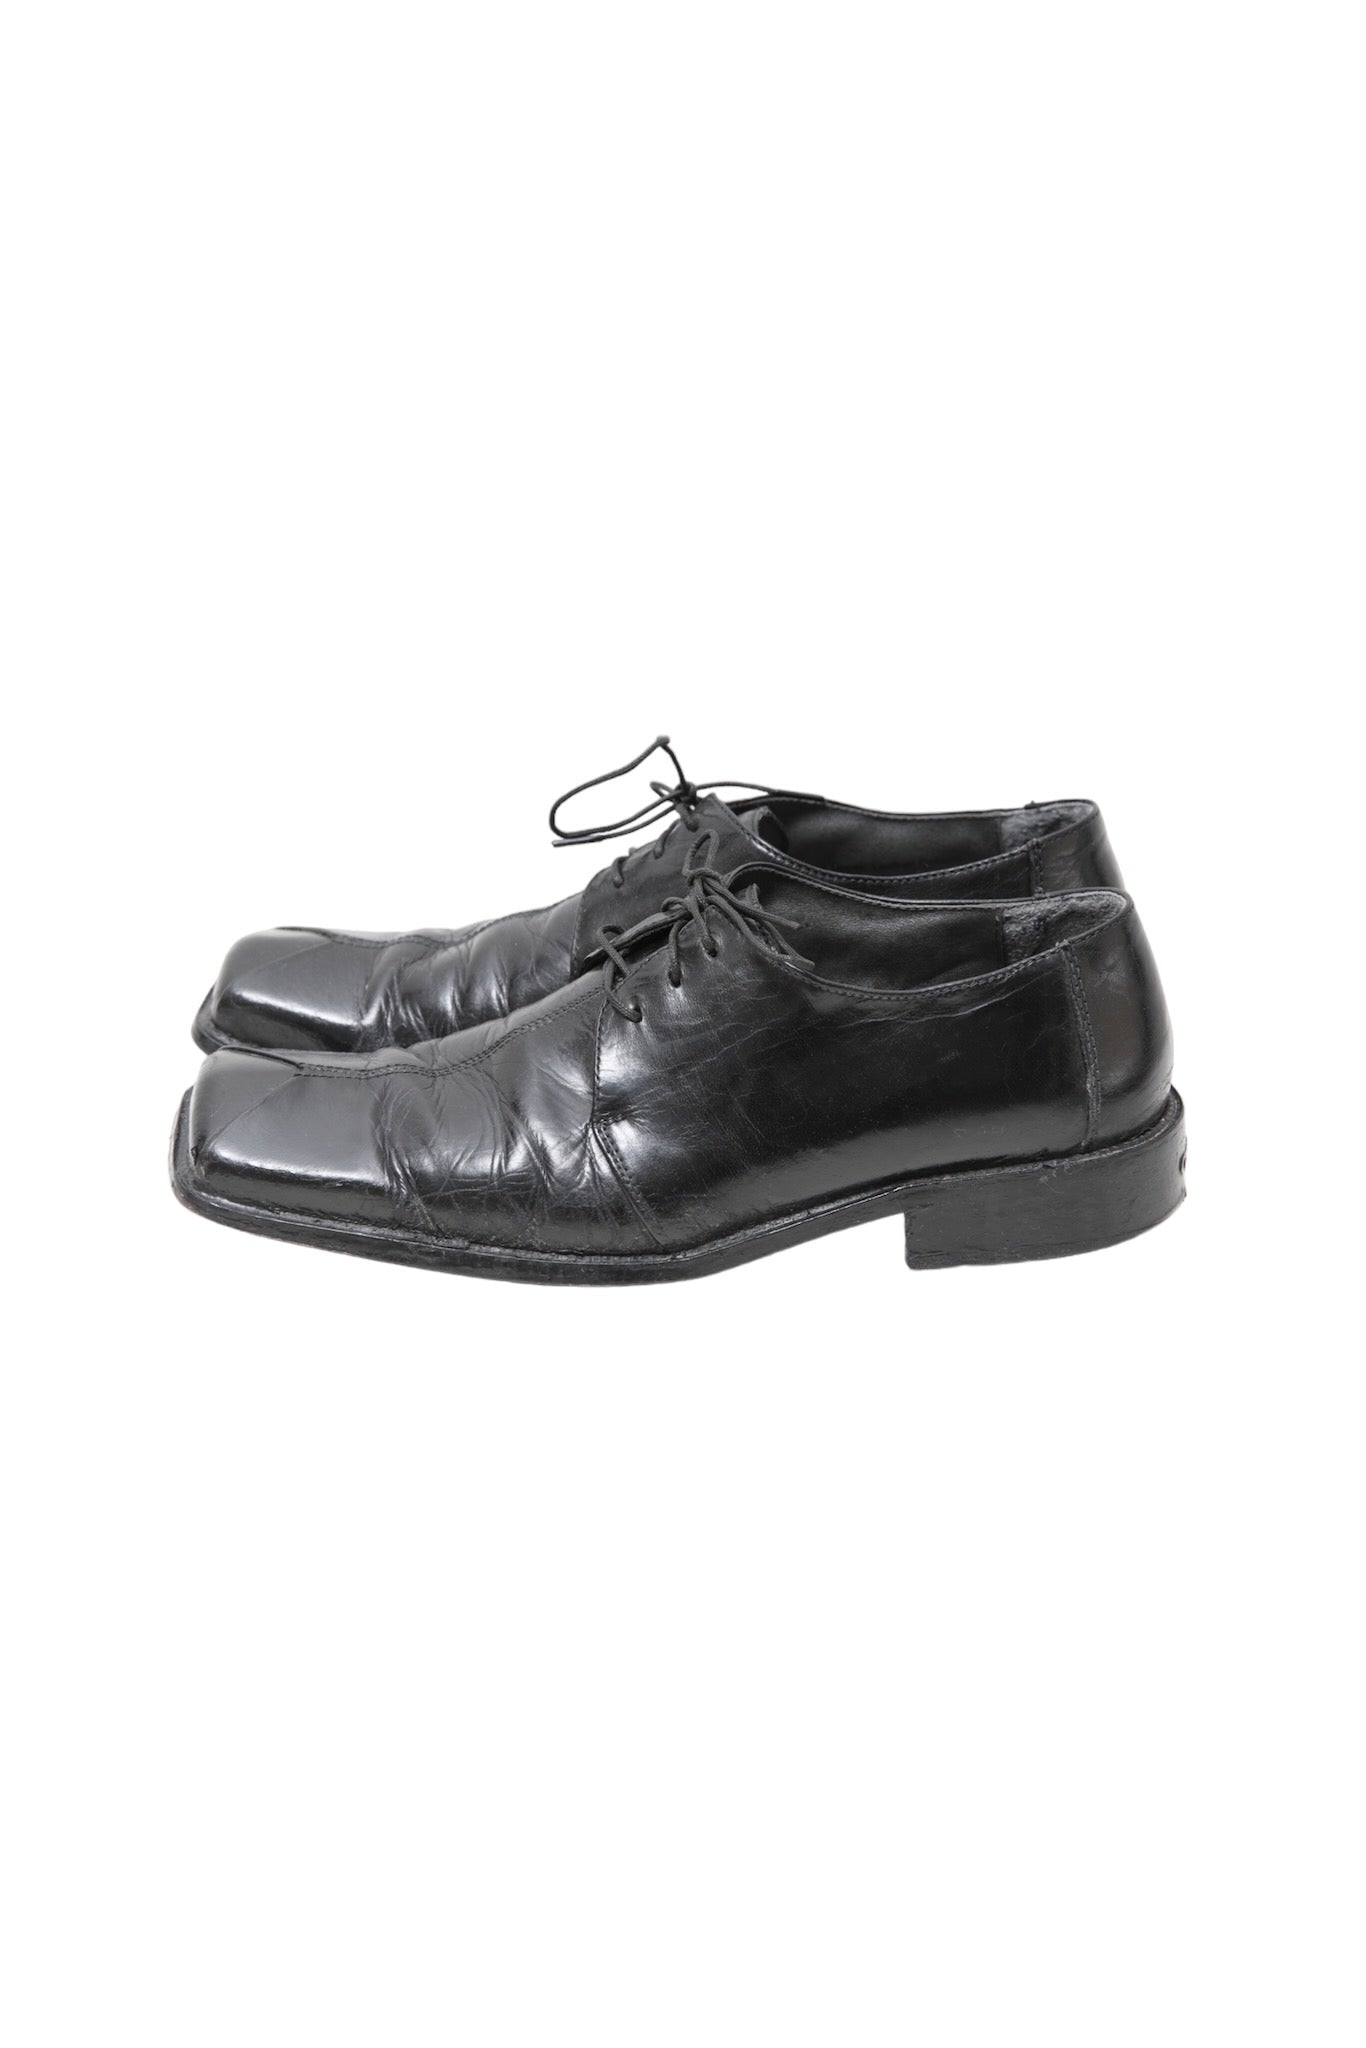 SQUARE TOE LEATHER SHOES